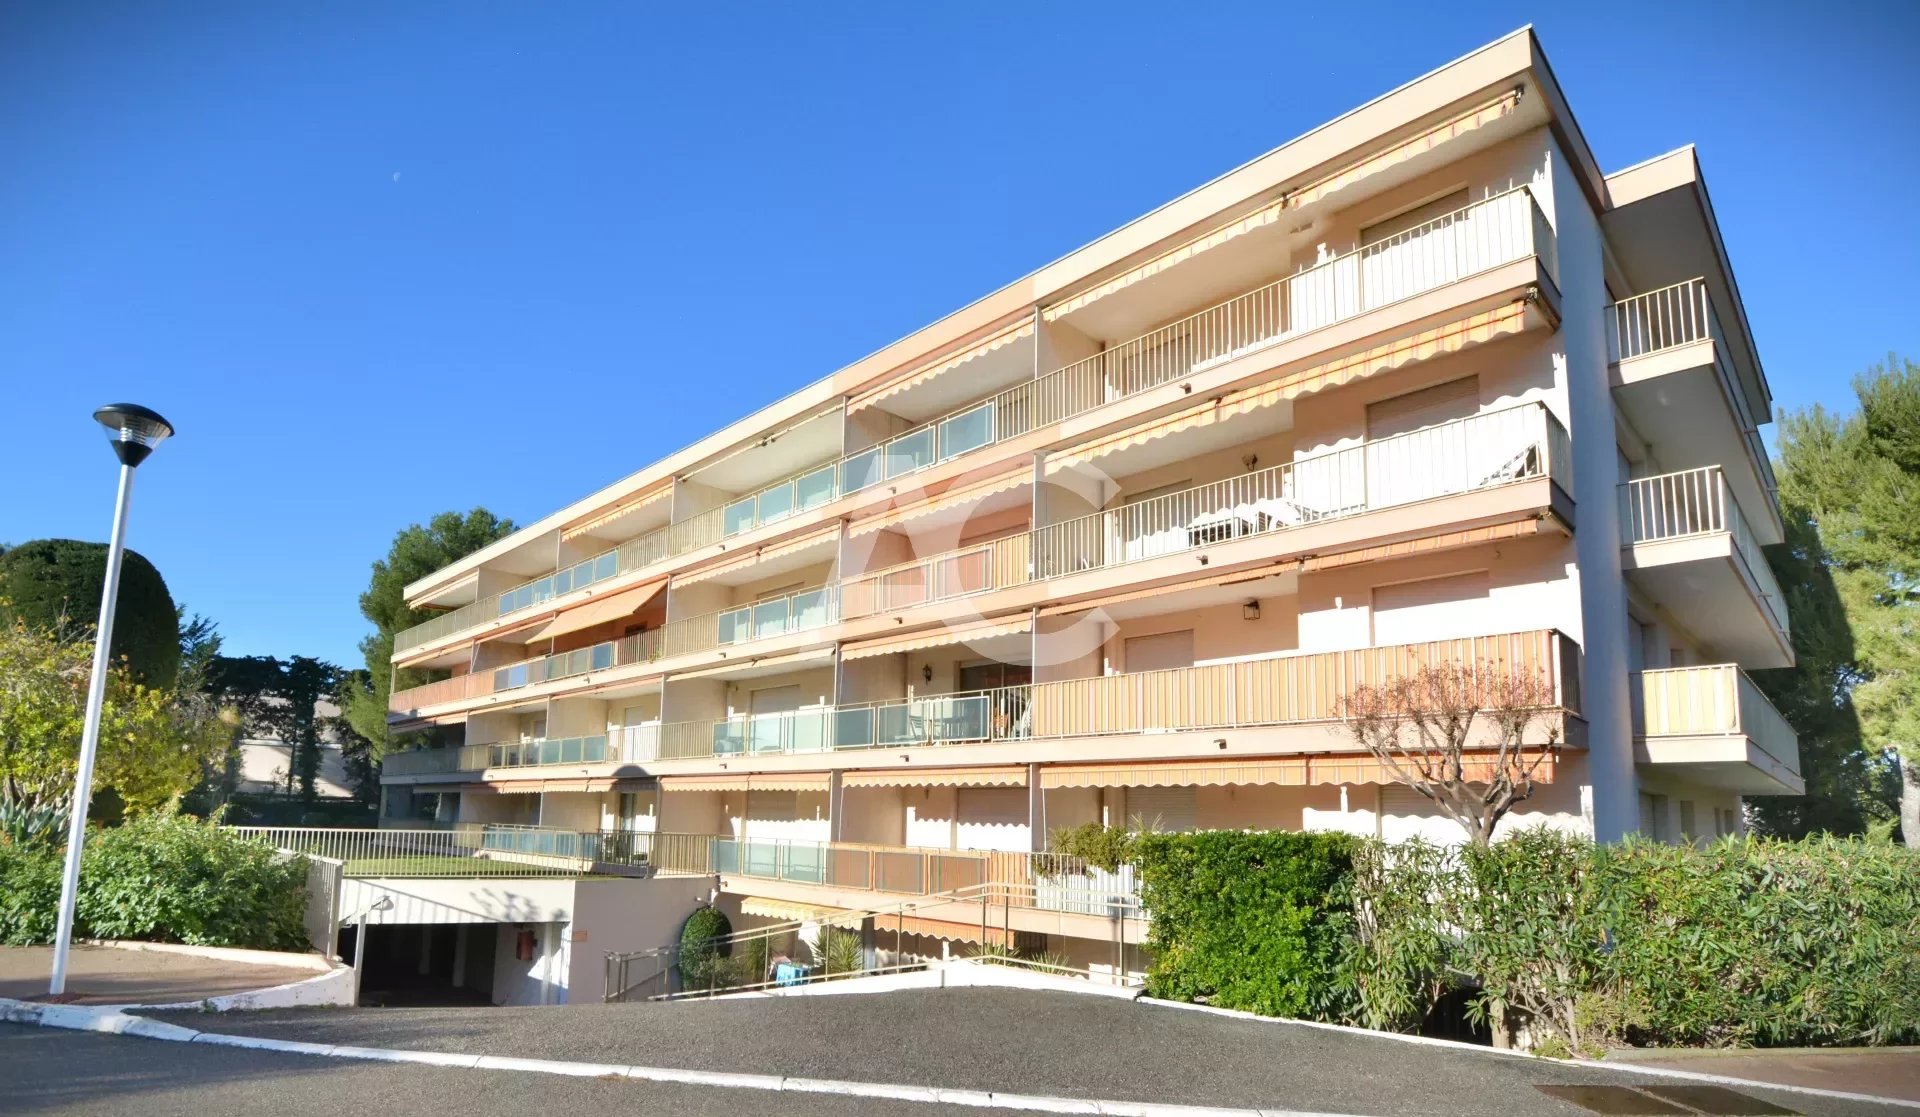 CAP D'ANTIBES - SUPERB TWO BEDROOMS APARTMENT WITH GARAGE